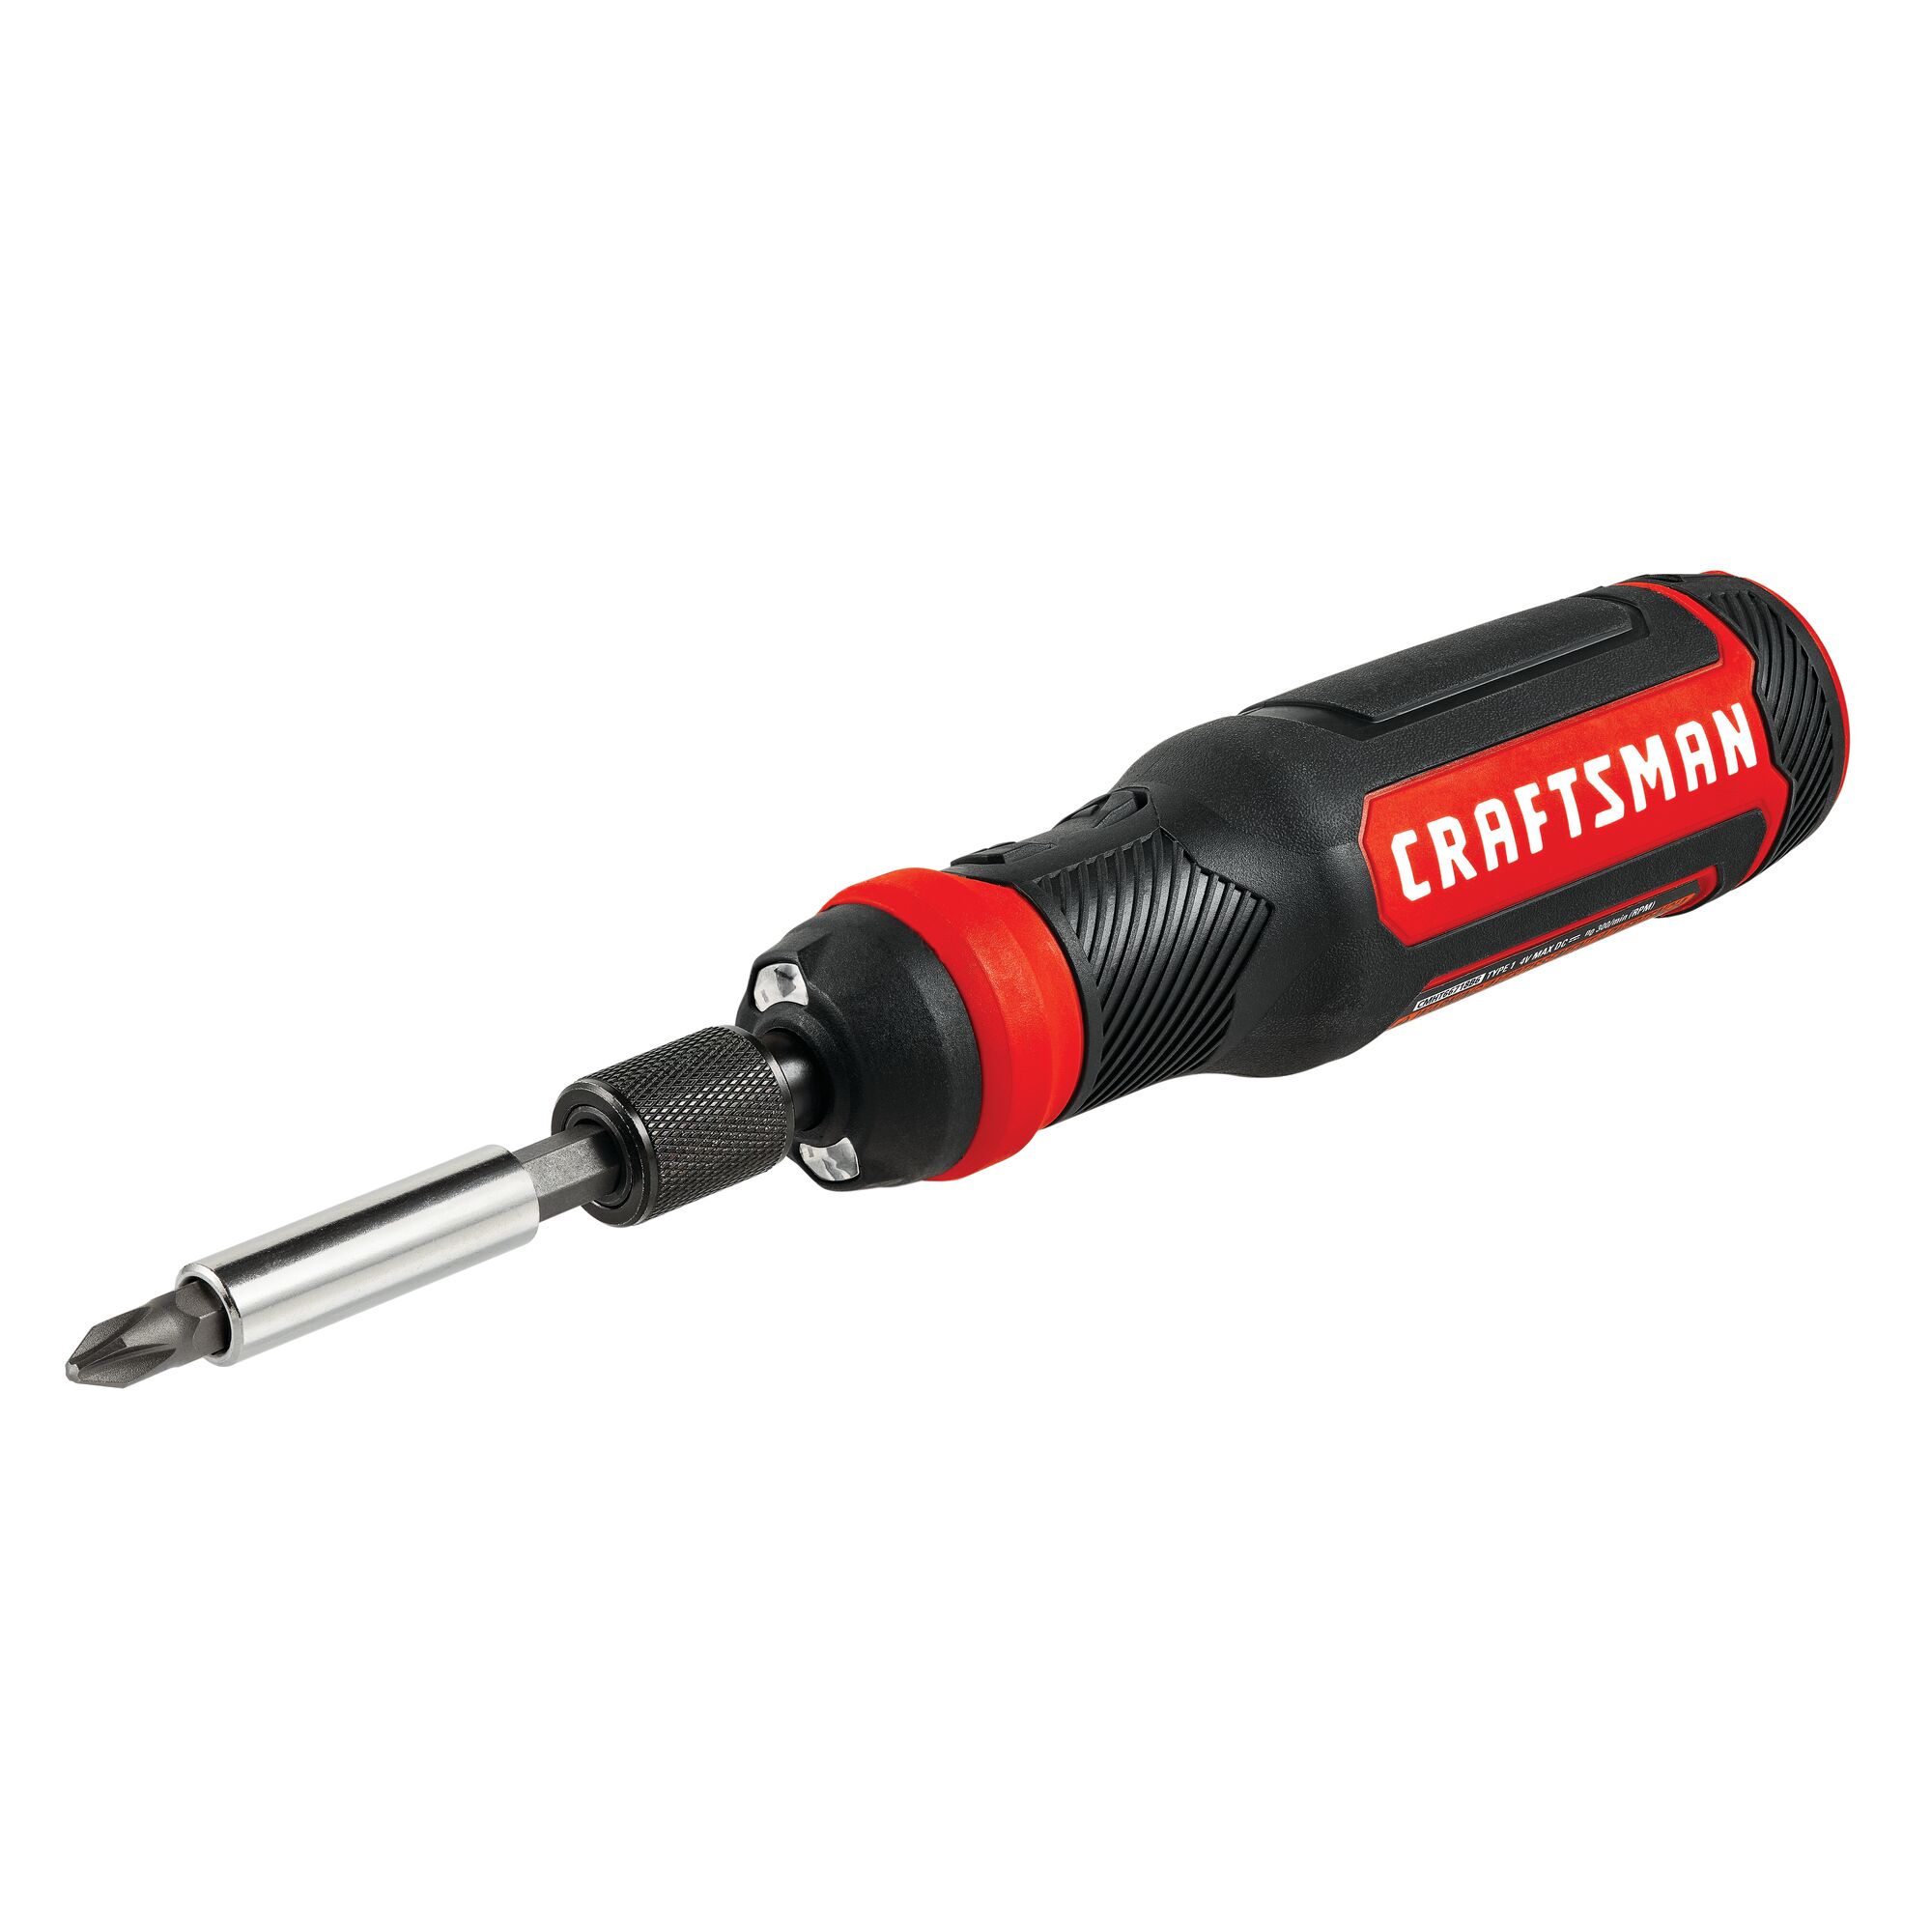 View of CRAFTSMAN Screwdrivers on white background